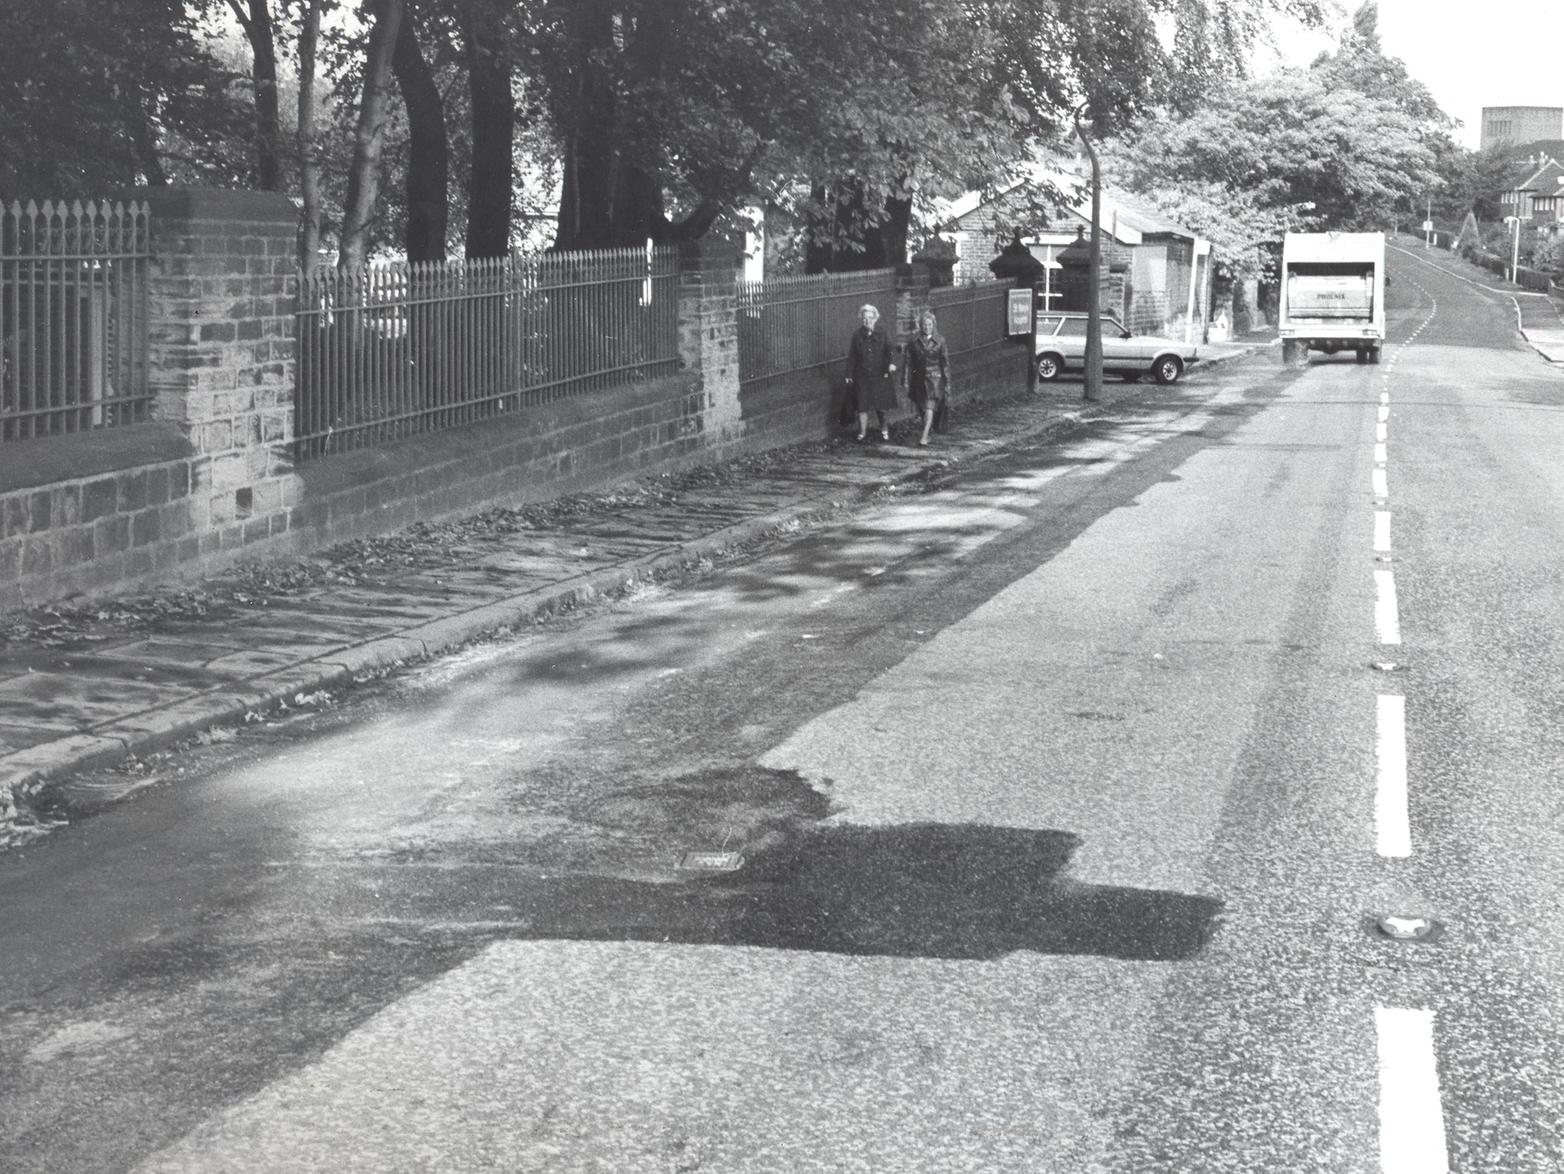 The end was in sight for a drivers' nightmare in Armley dubbed 'rocky road' by motorists. The trouble started when Yorkshire Water workmen installed a mains trench and then supply pipes to houses along Greenhill Road.